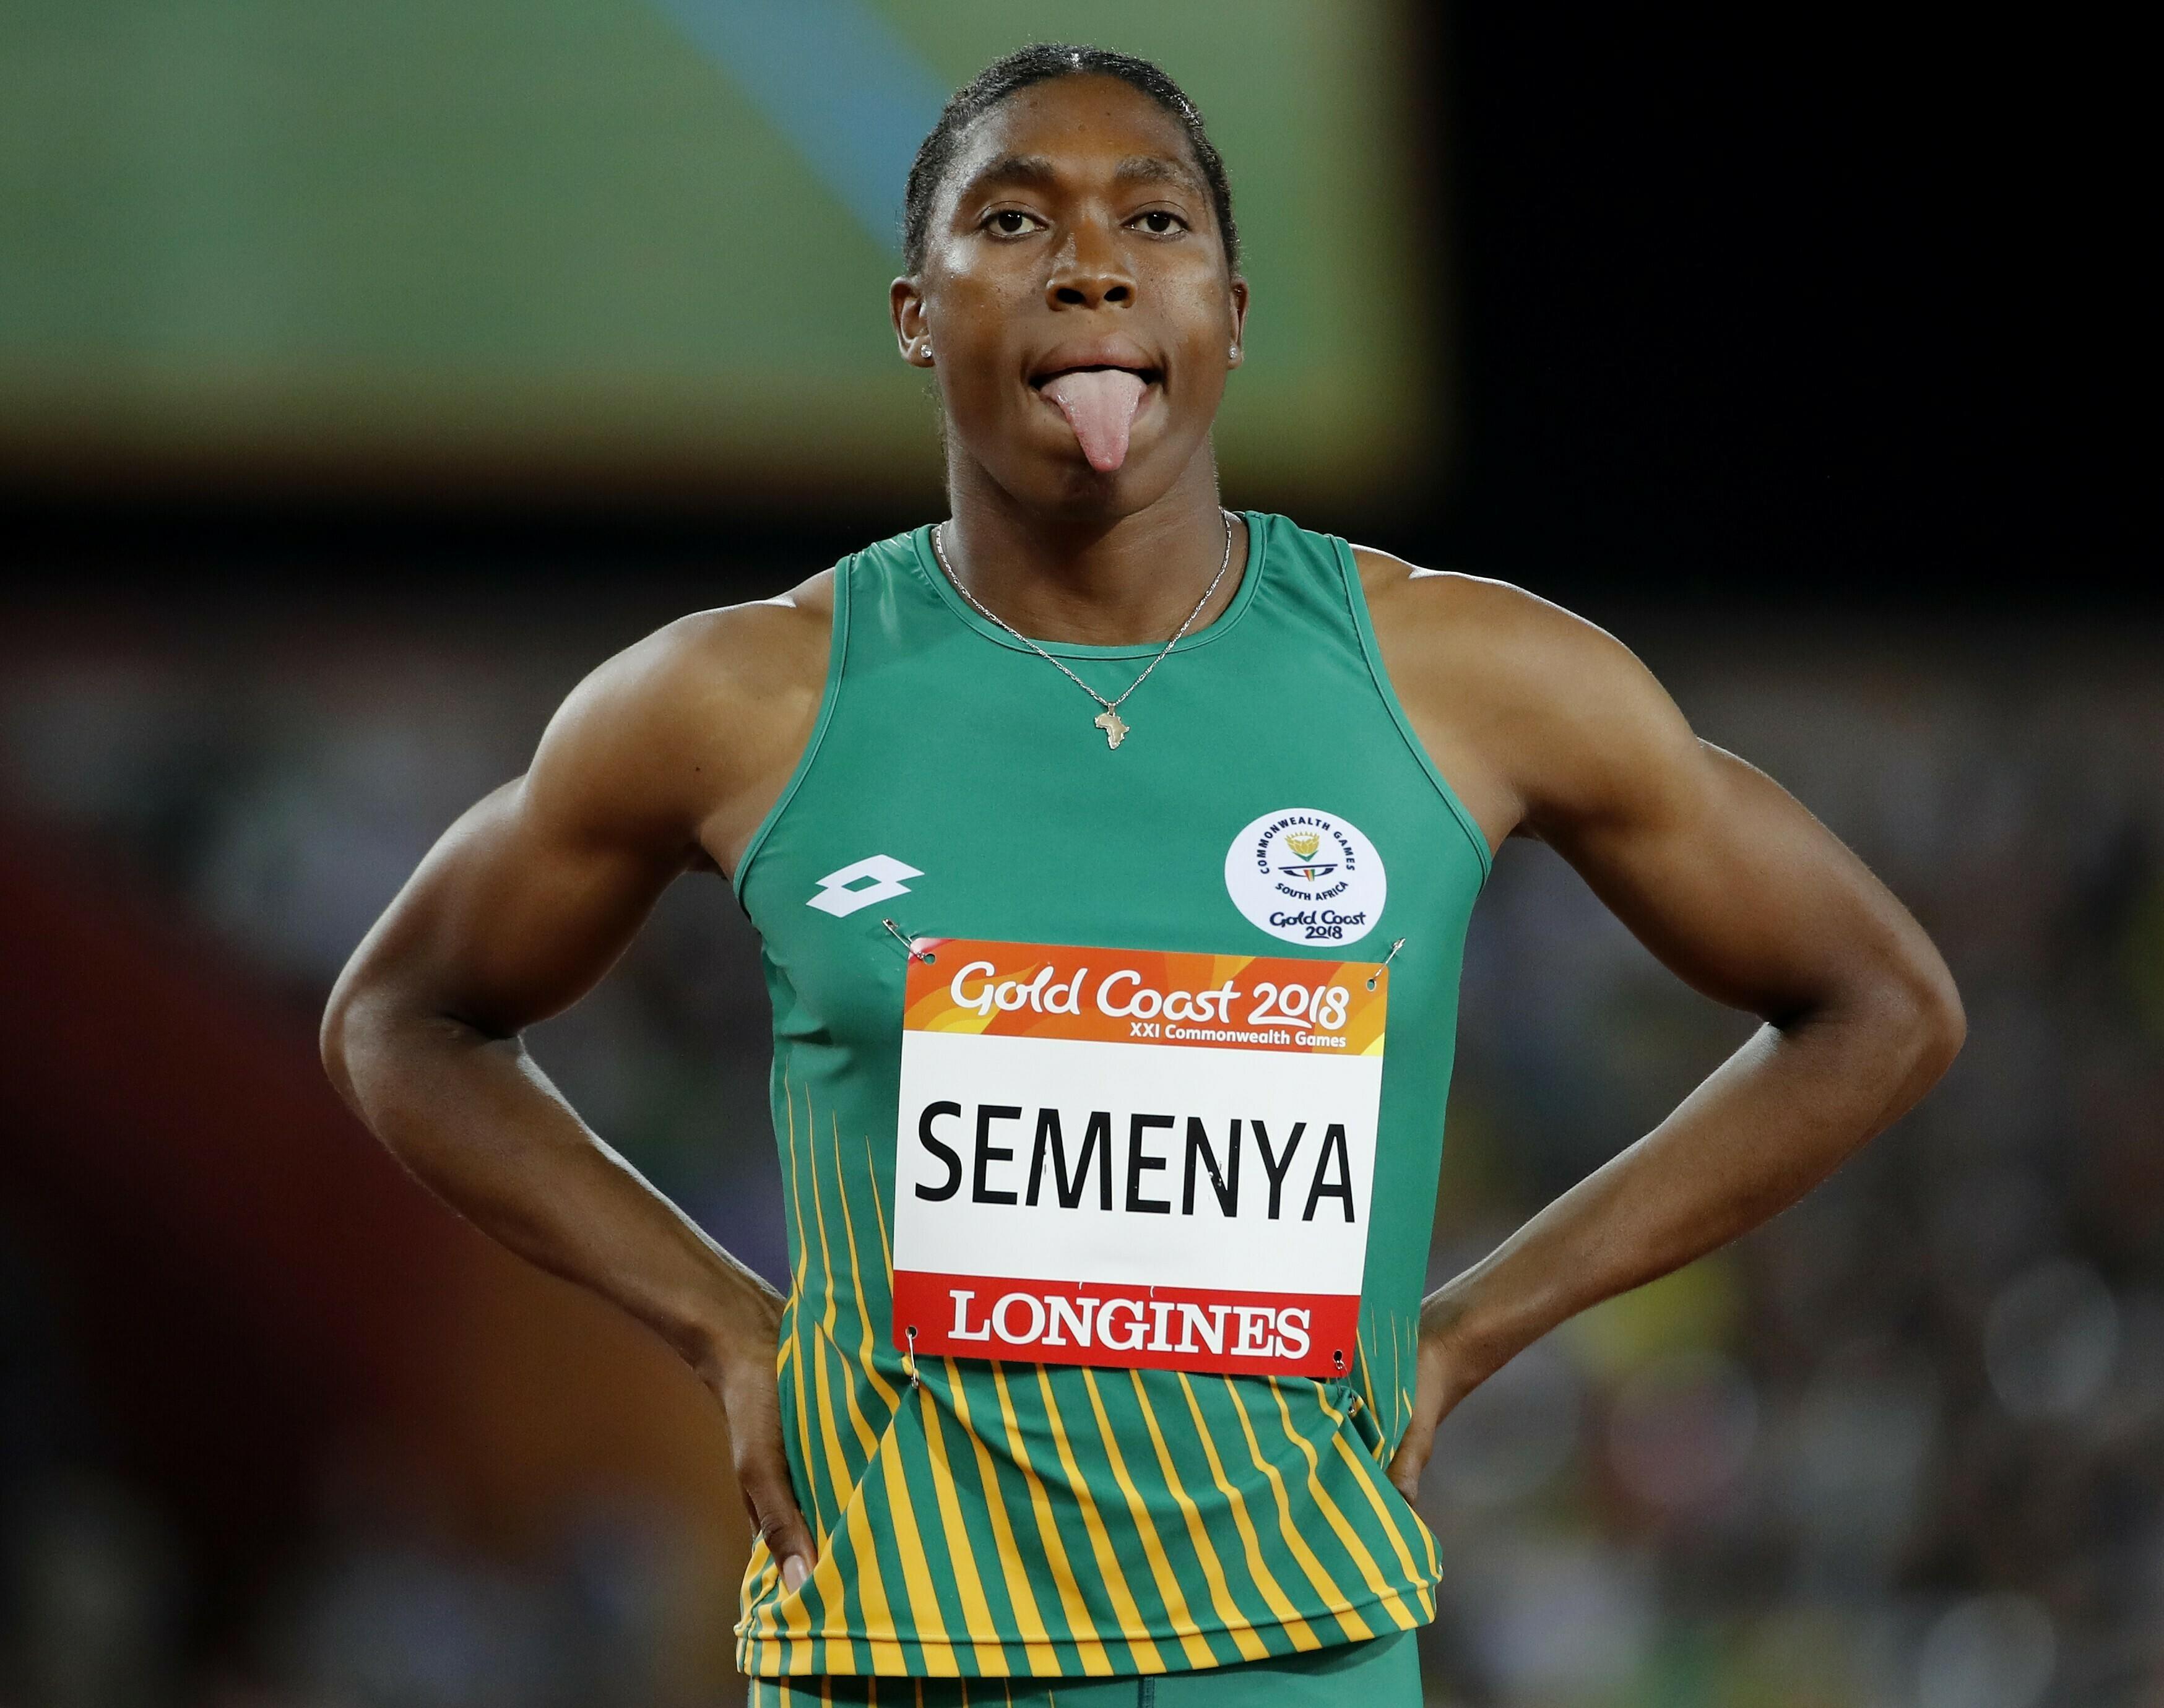 Olympic runner Caster Semenya loses fight over testosterone rules The